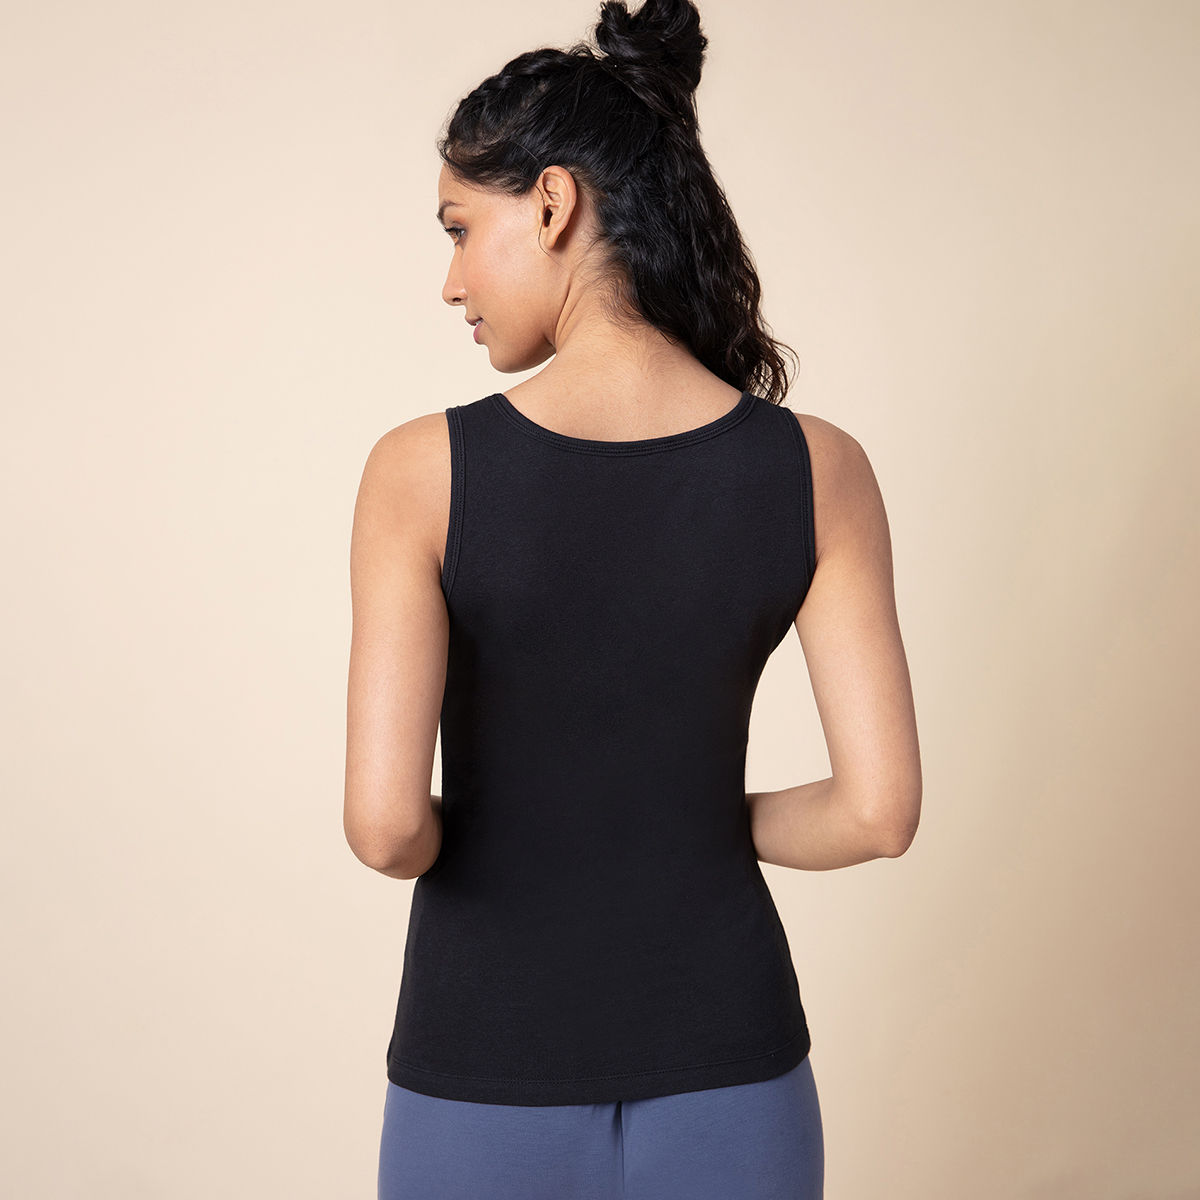 Nykd by Nykaa Essential Cotton Tank Top With Antimicrobial Finish, Nykd ...